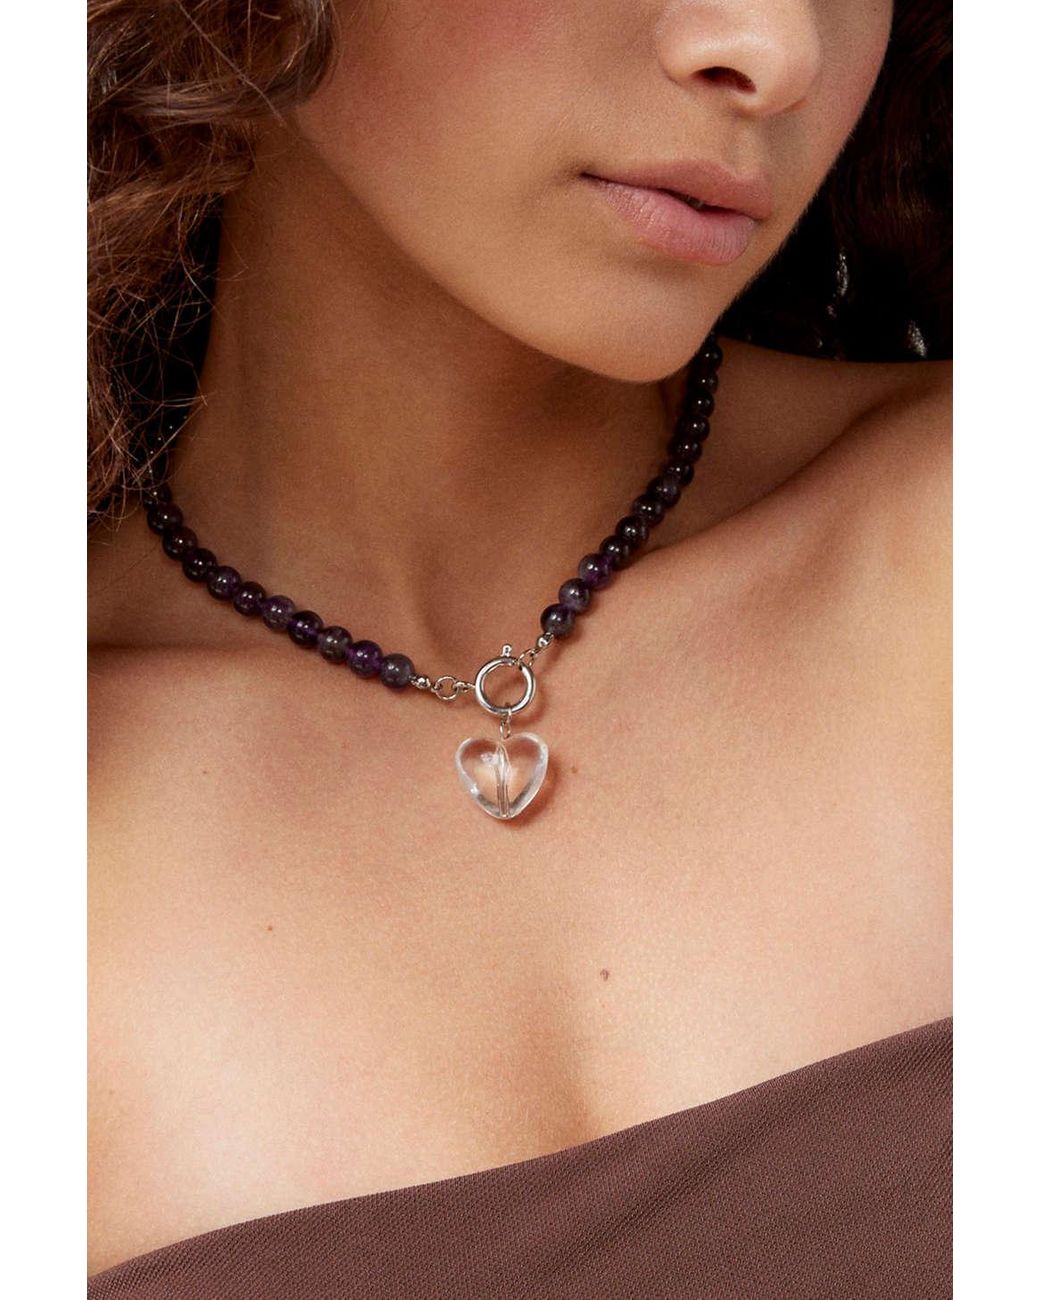 Delicate Heart Layering Necklace | Urban Outfitters Japan - Clothing,  Music, Home & Accessories